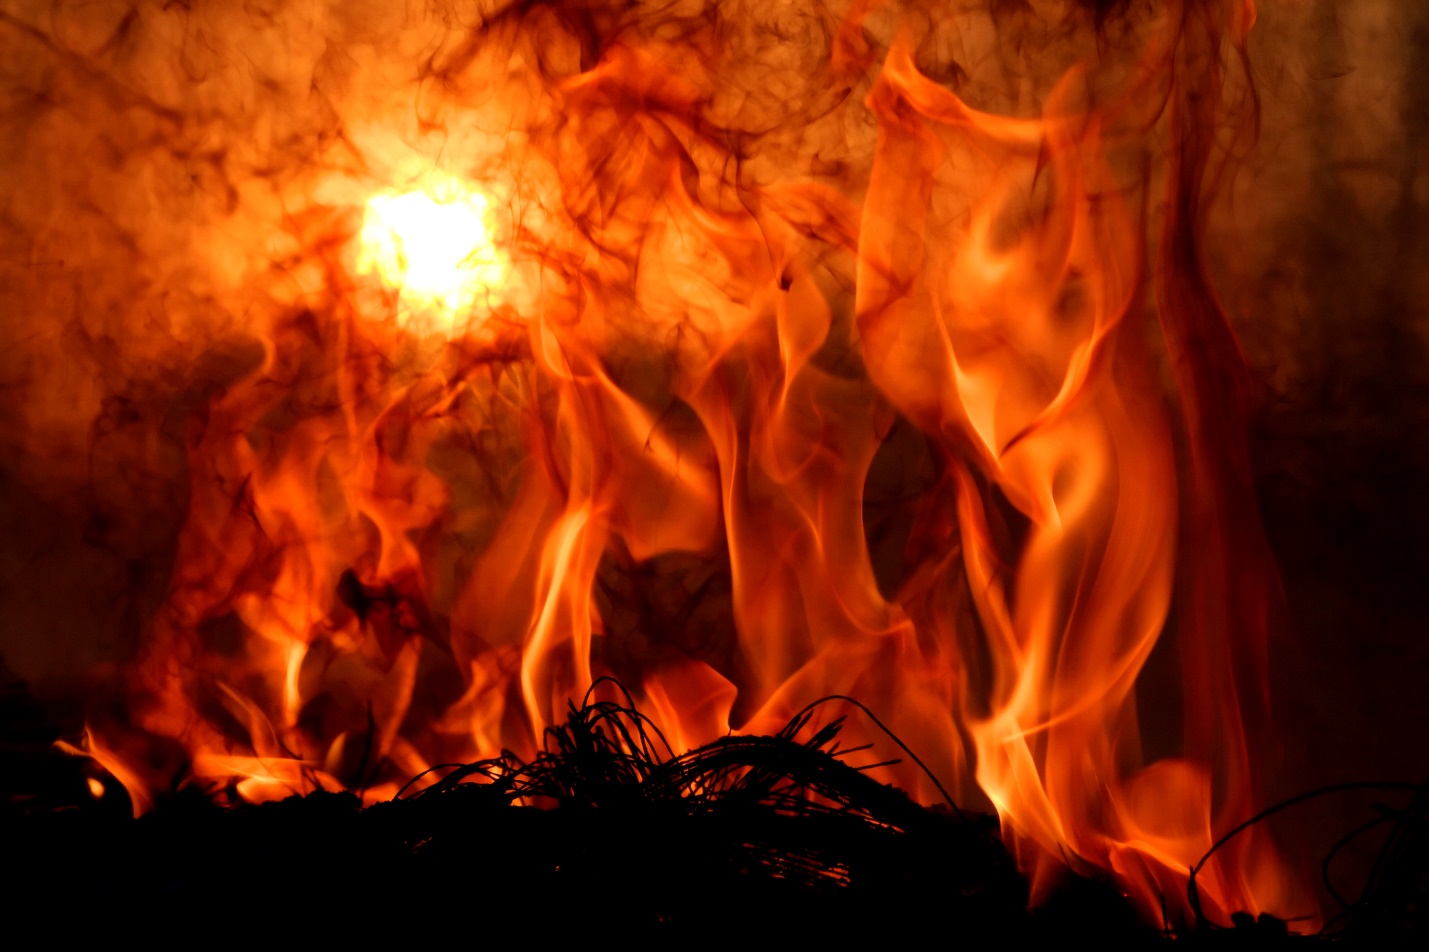 A picture containing fire, fireplace, nature, cooking

Description automatically generated